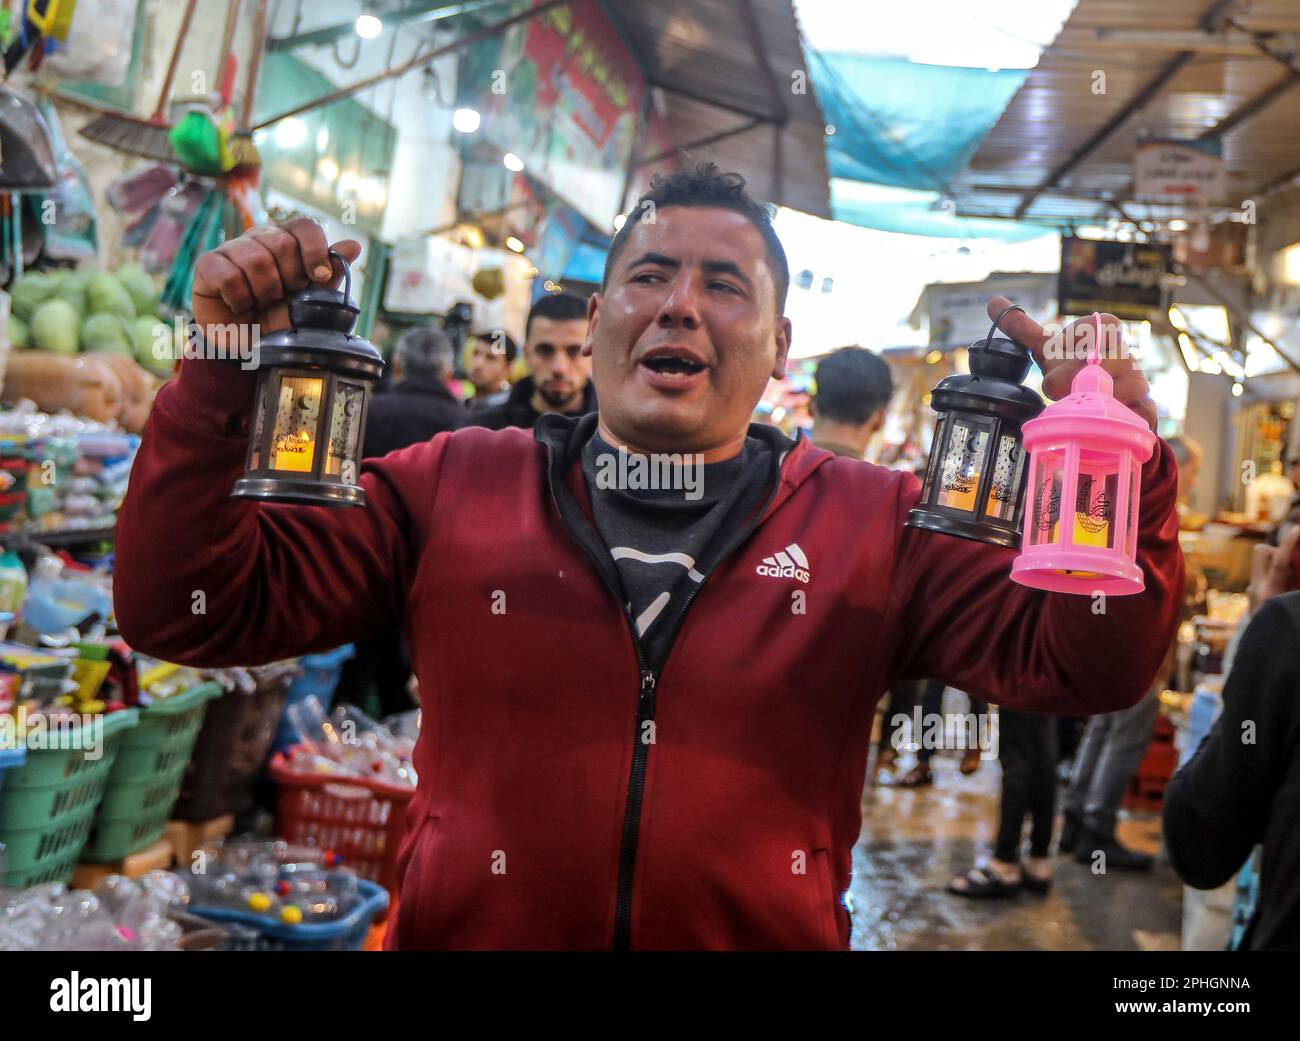 Palestinians shop for decorations at the old Zawiya market in Gaza City, in preparation for the holy month of Ramadan. Gaza Strip. Palestine. Stock Photo